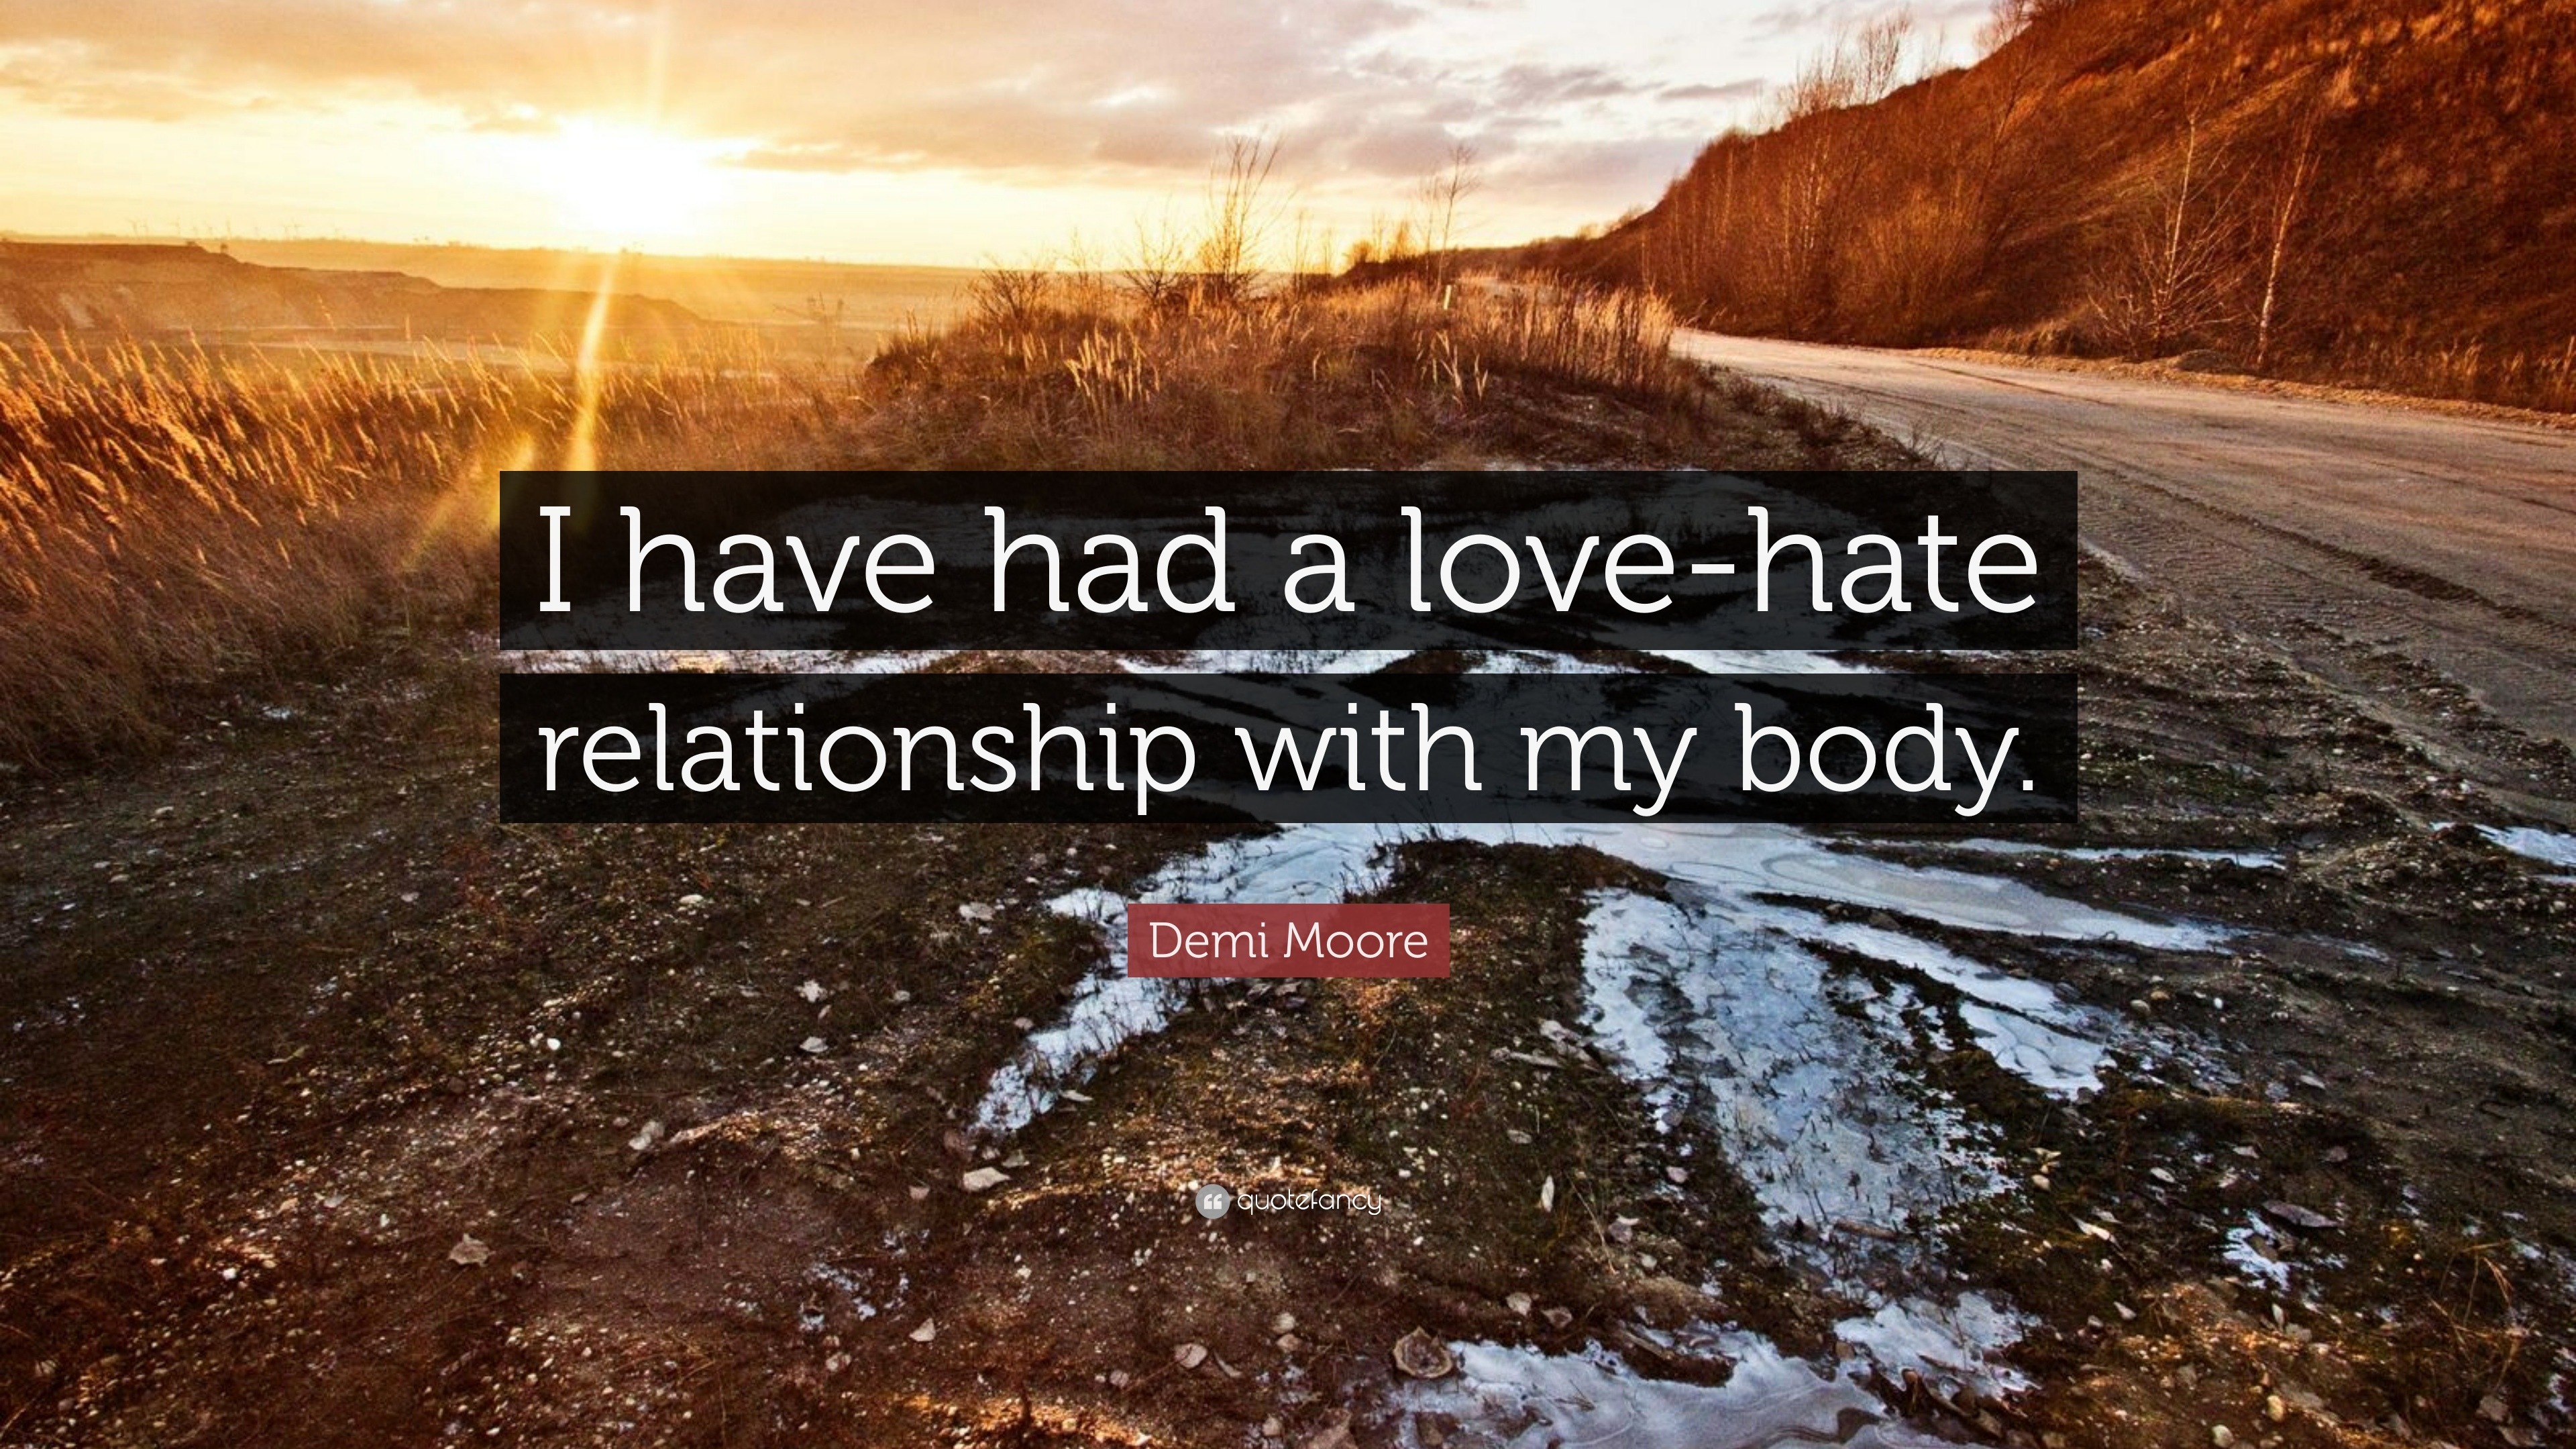 Demi Moore Quote “I have had a love hate relationship with my body